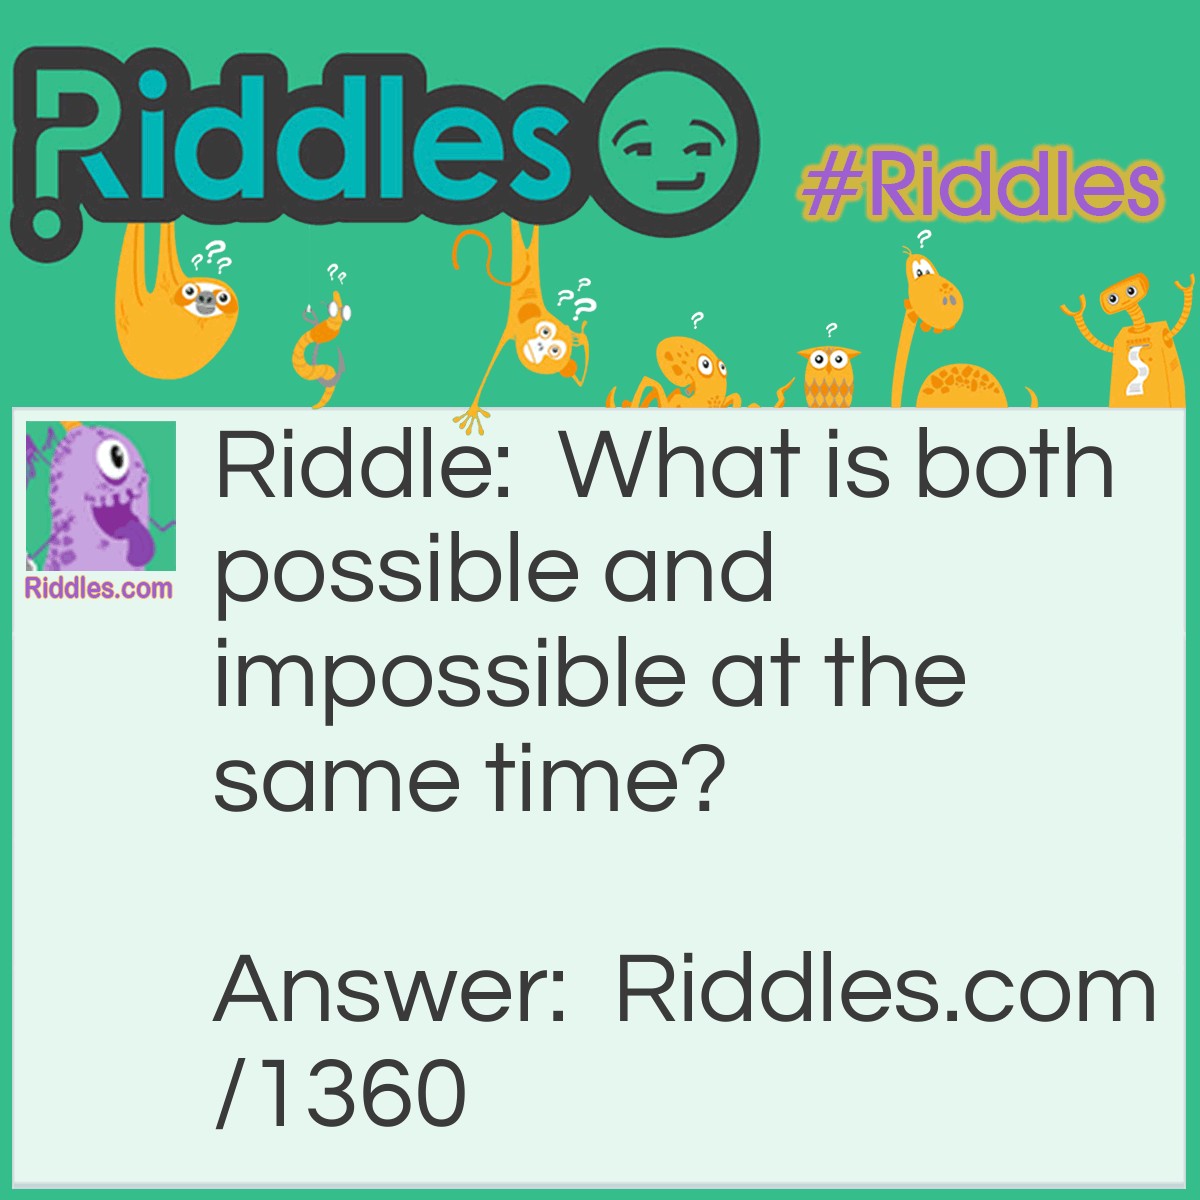 Riddle: What is both possible and impossible at the same time? Answer: Impossibility.